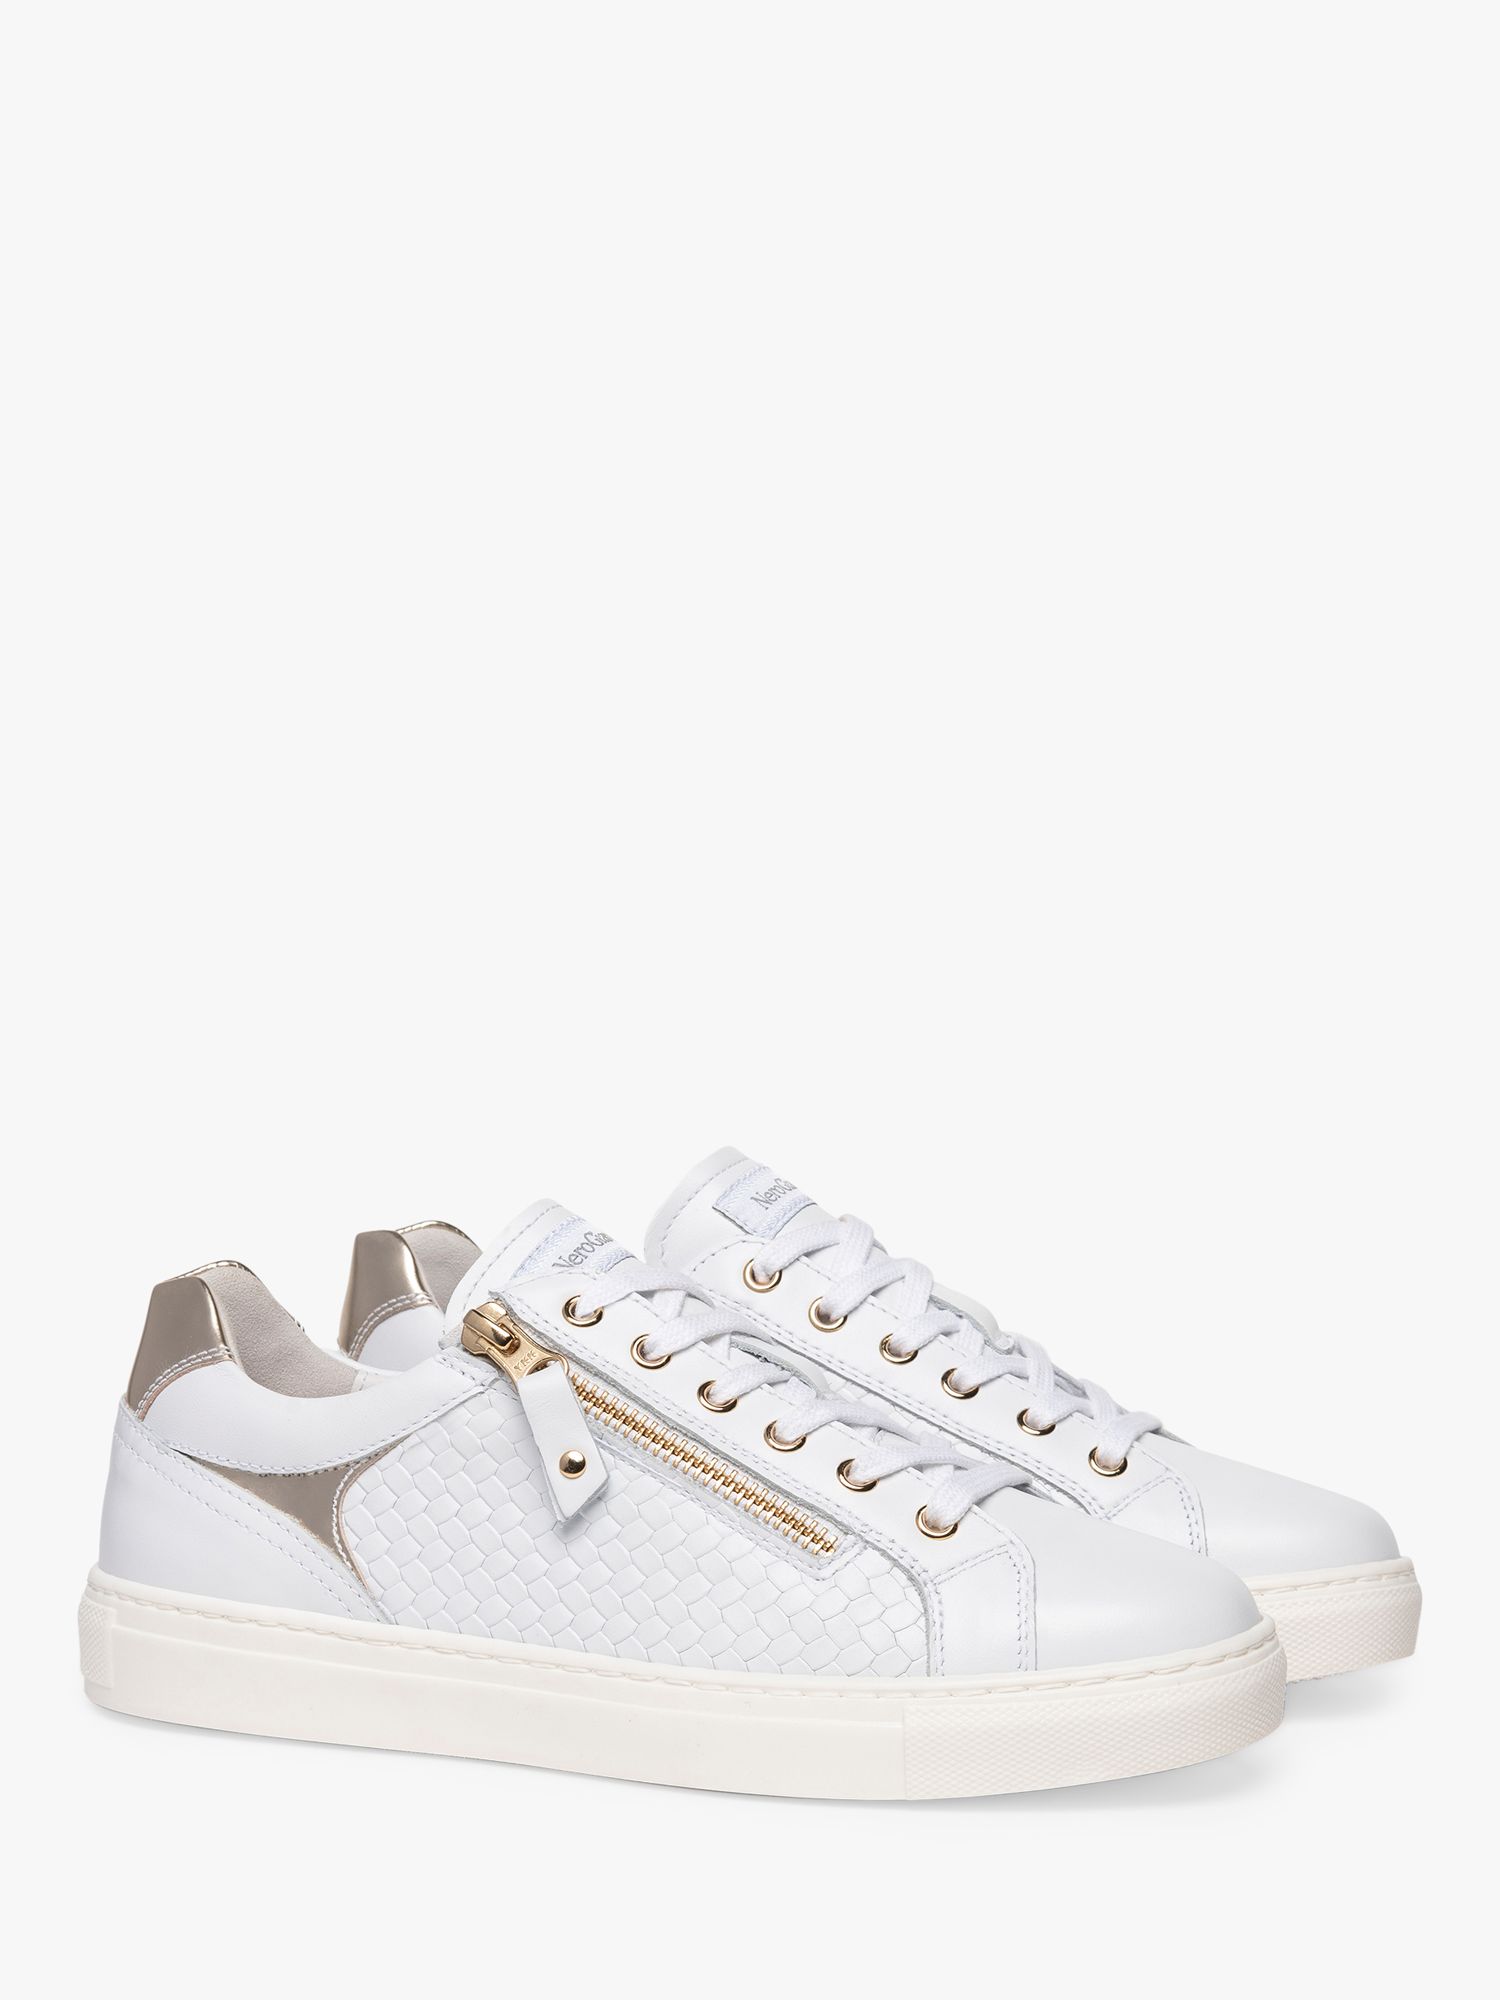 Buy NeroGiardini Leather Zip Detail Trainers, White Online at johnlewis.com